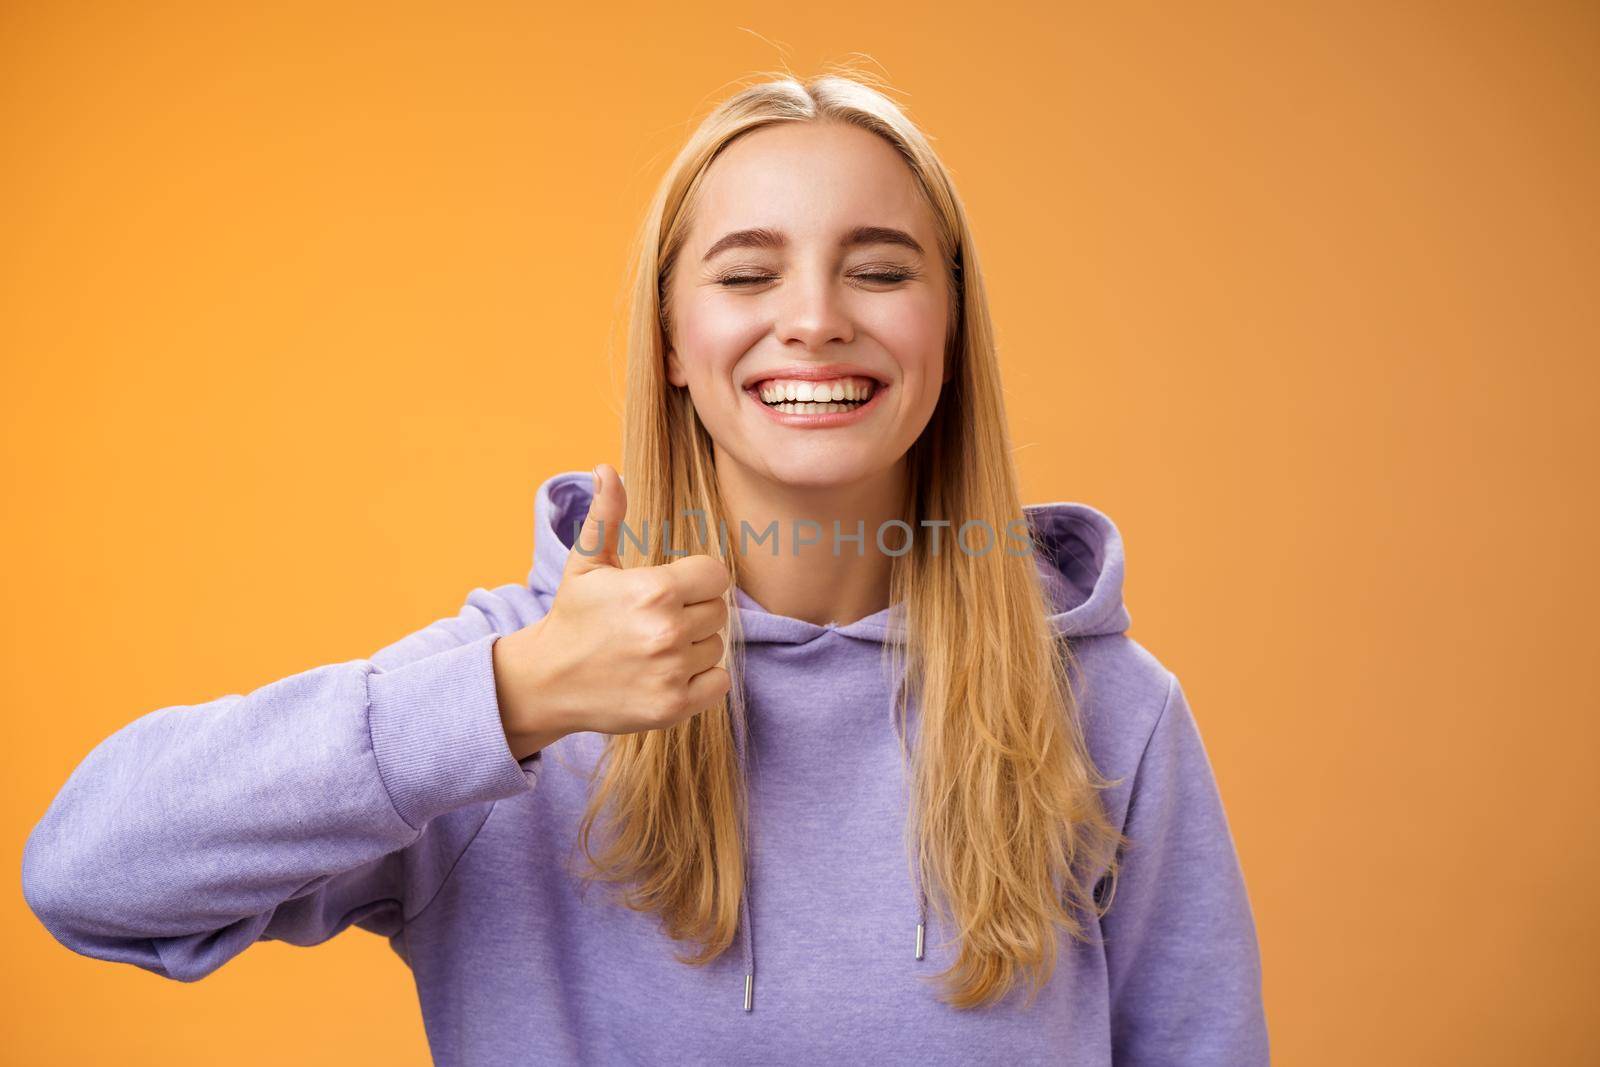 Amused joyful optimistic young excited blond european female model in hoodie smiling broadly close eyes having fun show approval gesture thumbs-up like awesome trip vacation idea, orange background.